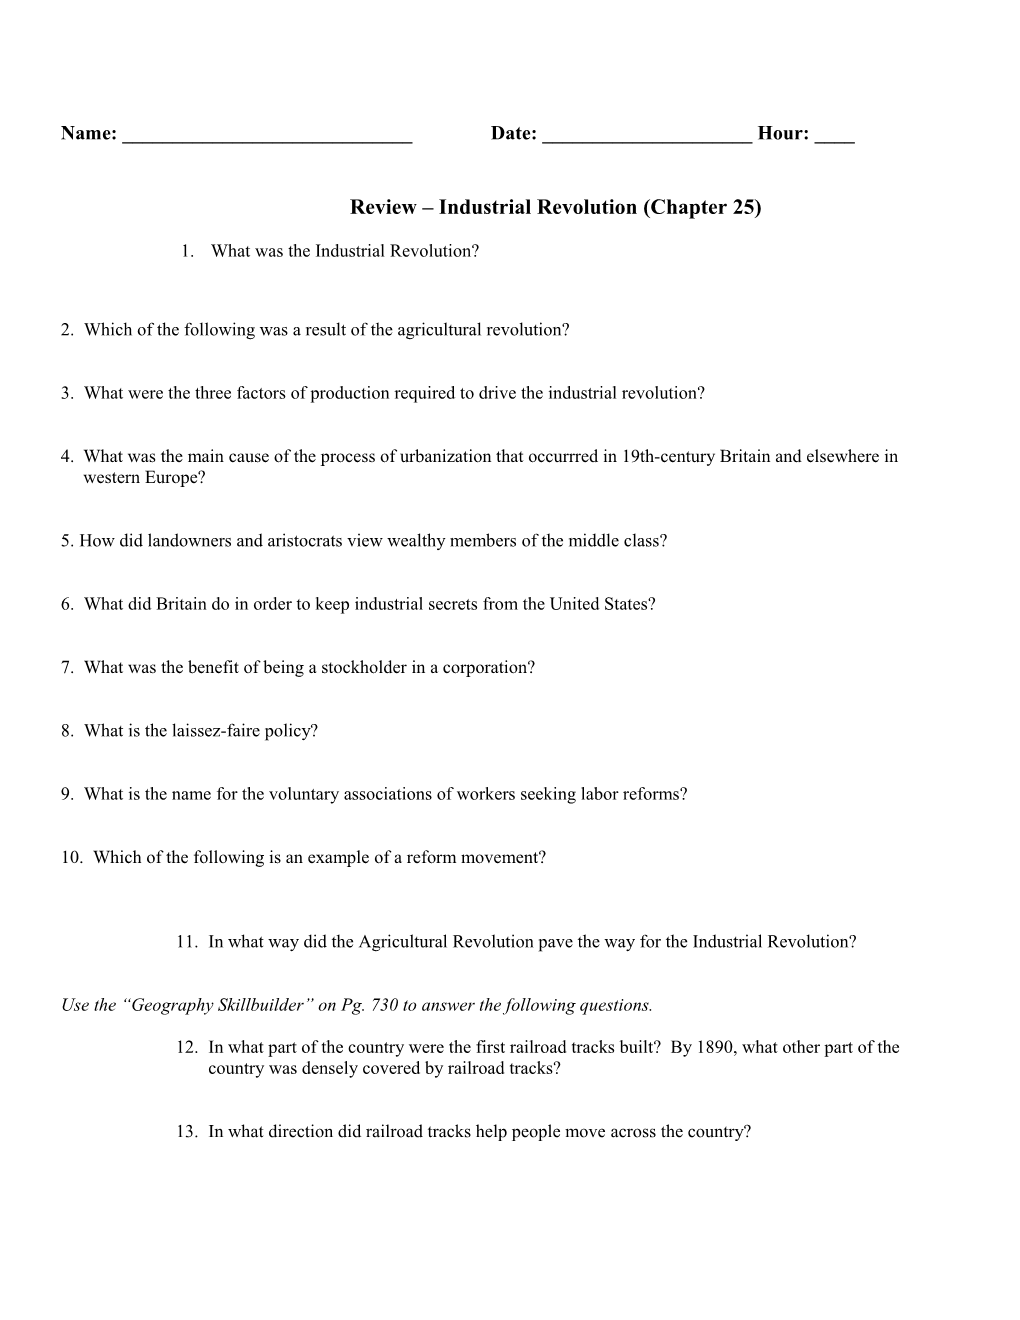 Review Industrial Revolution (Chapter 25)